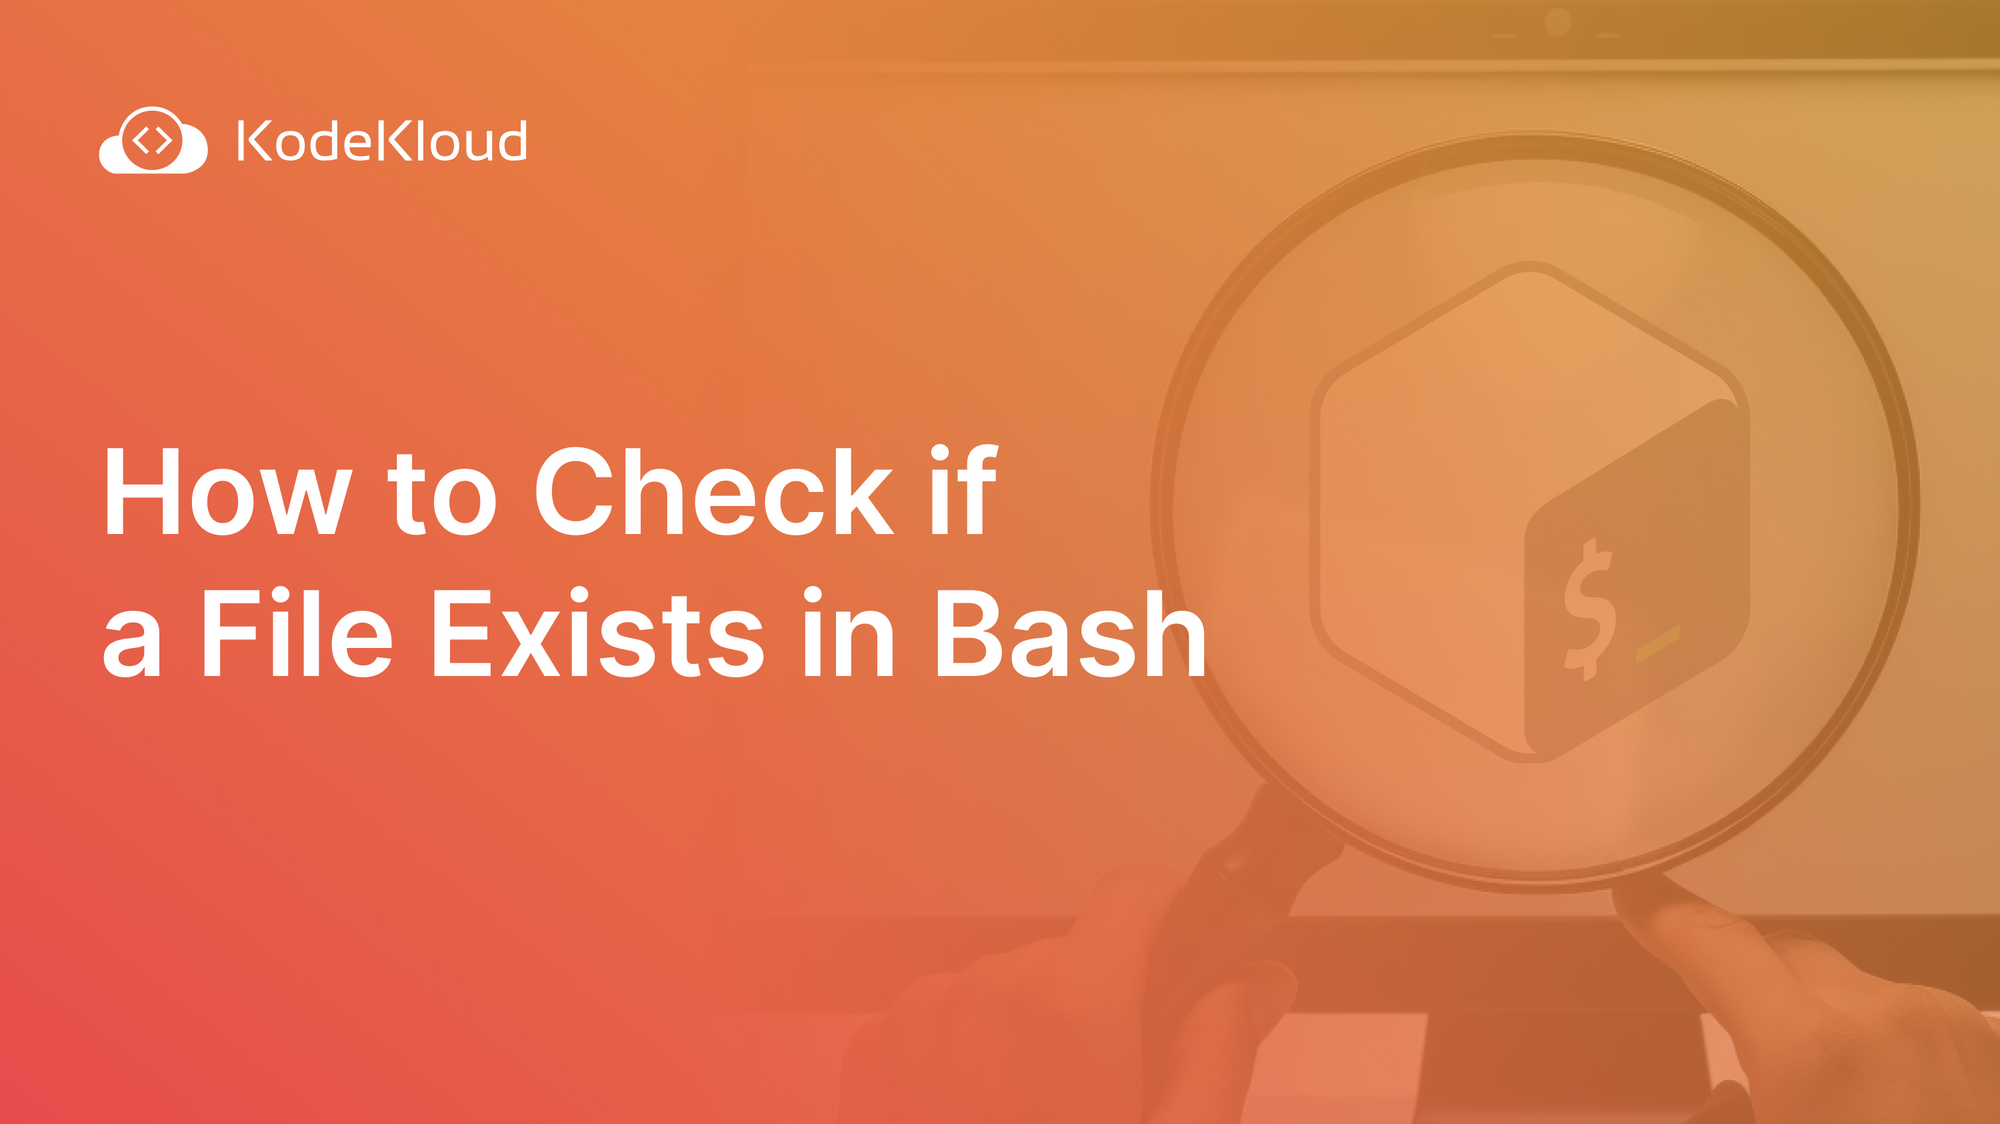 How to Check if a File Exists in Bash